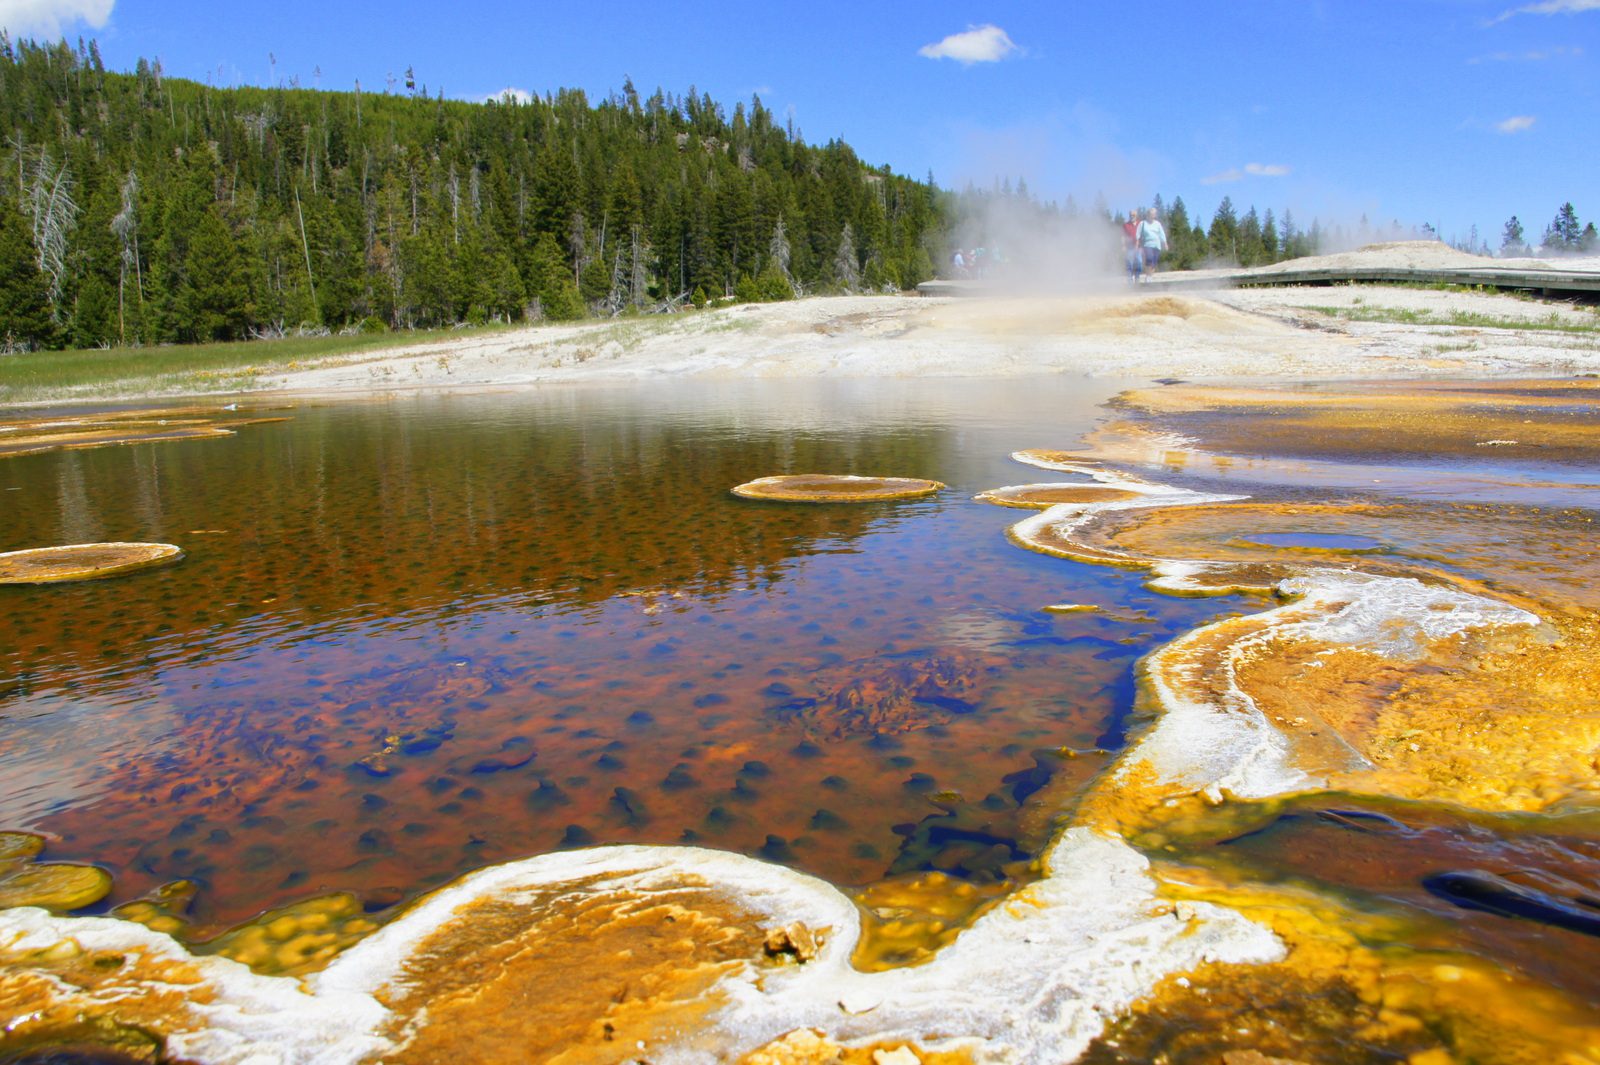 Bubbling pools of hot water and the colorful algae that live on them.